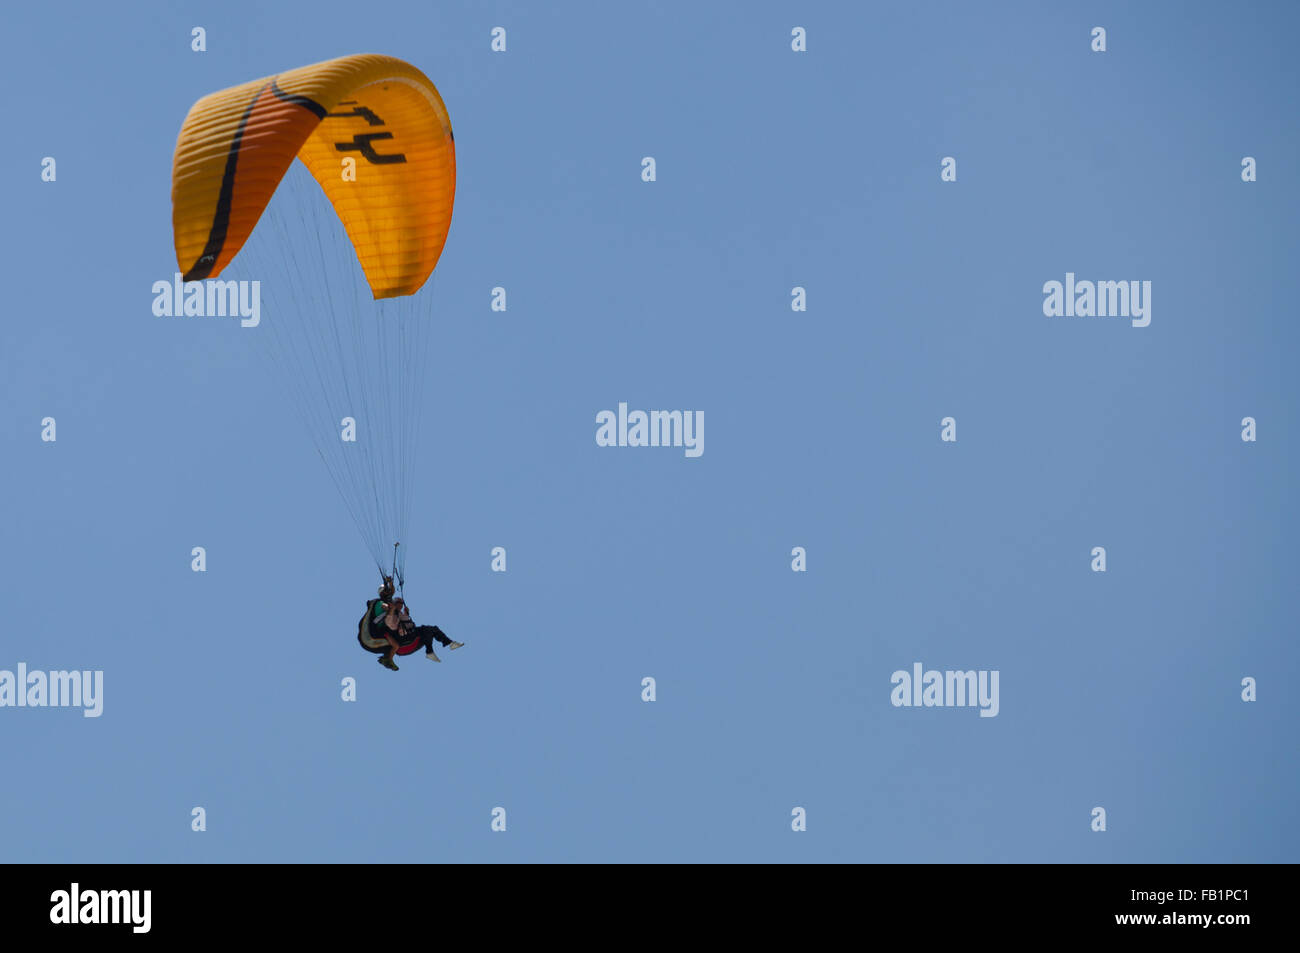 Paraglide tandem with yellow parachute in the blue sky Stock Photo